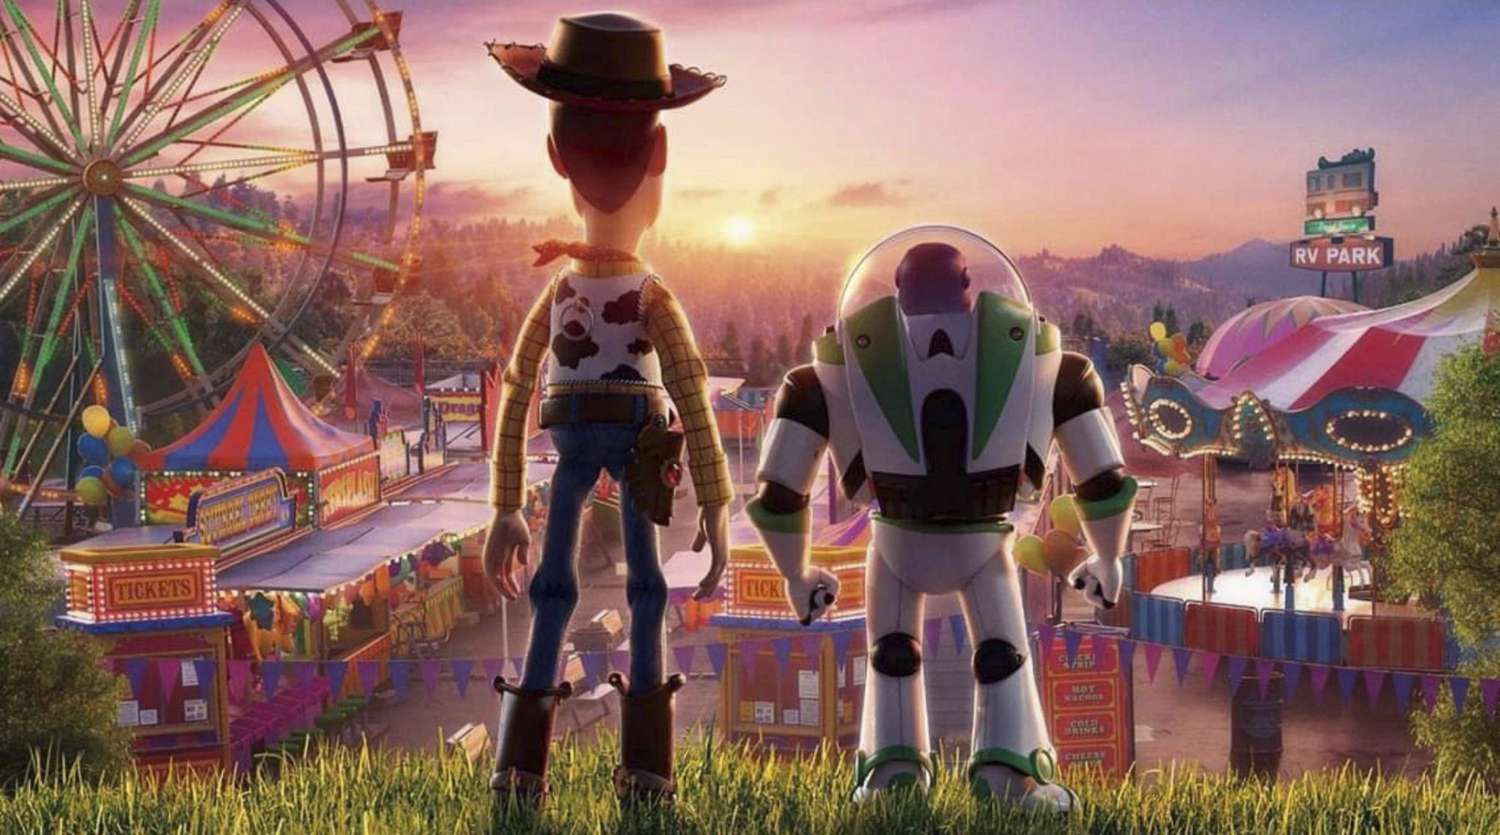 Is Toy Story 4 last?